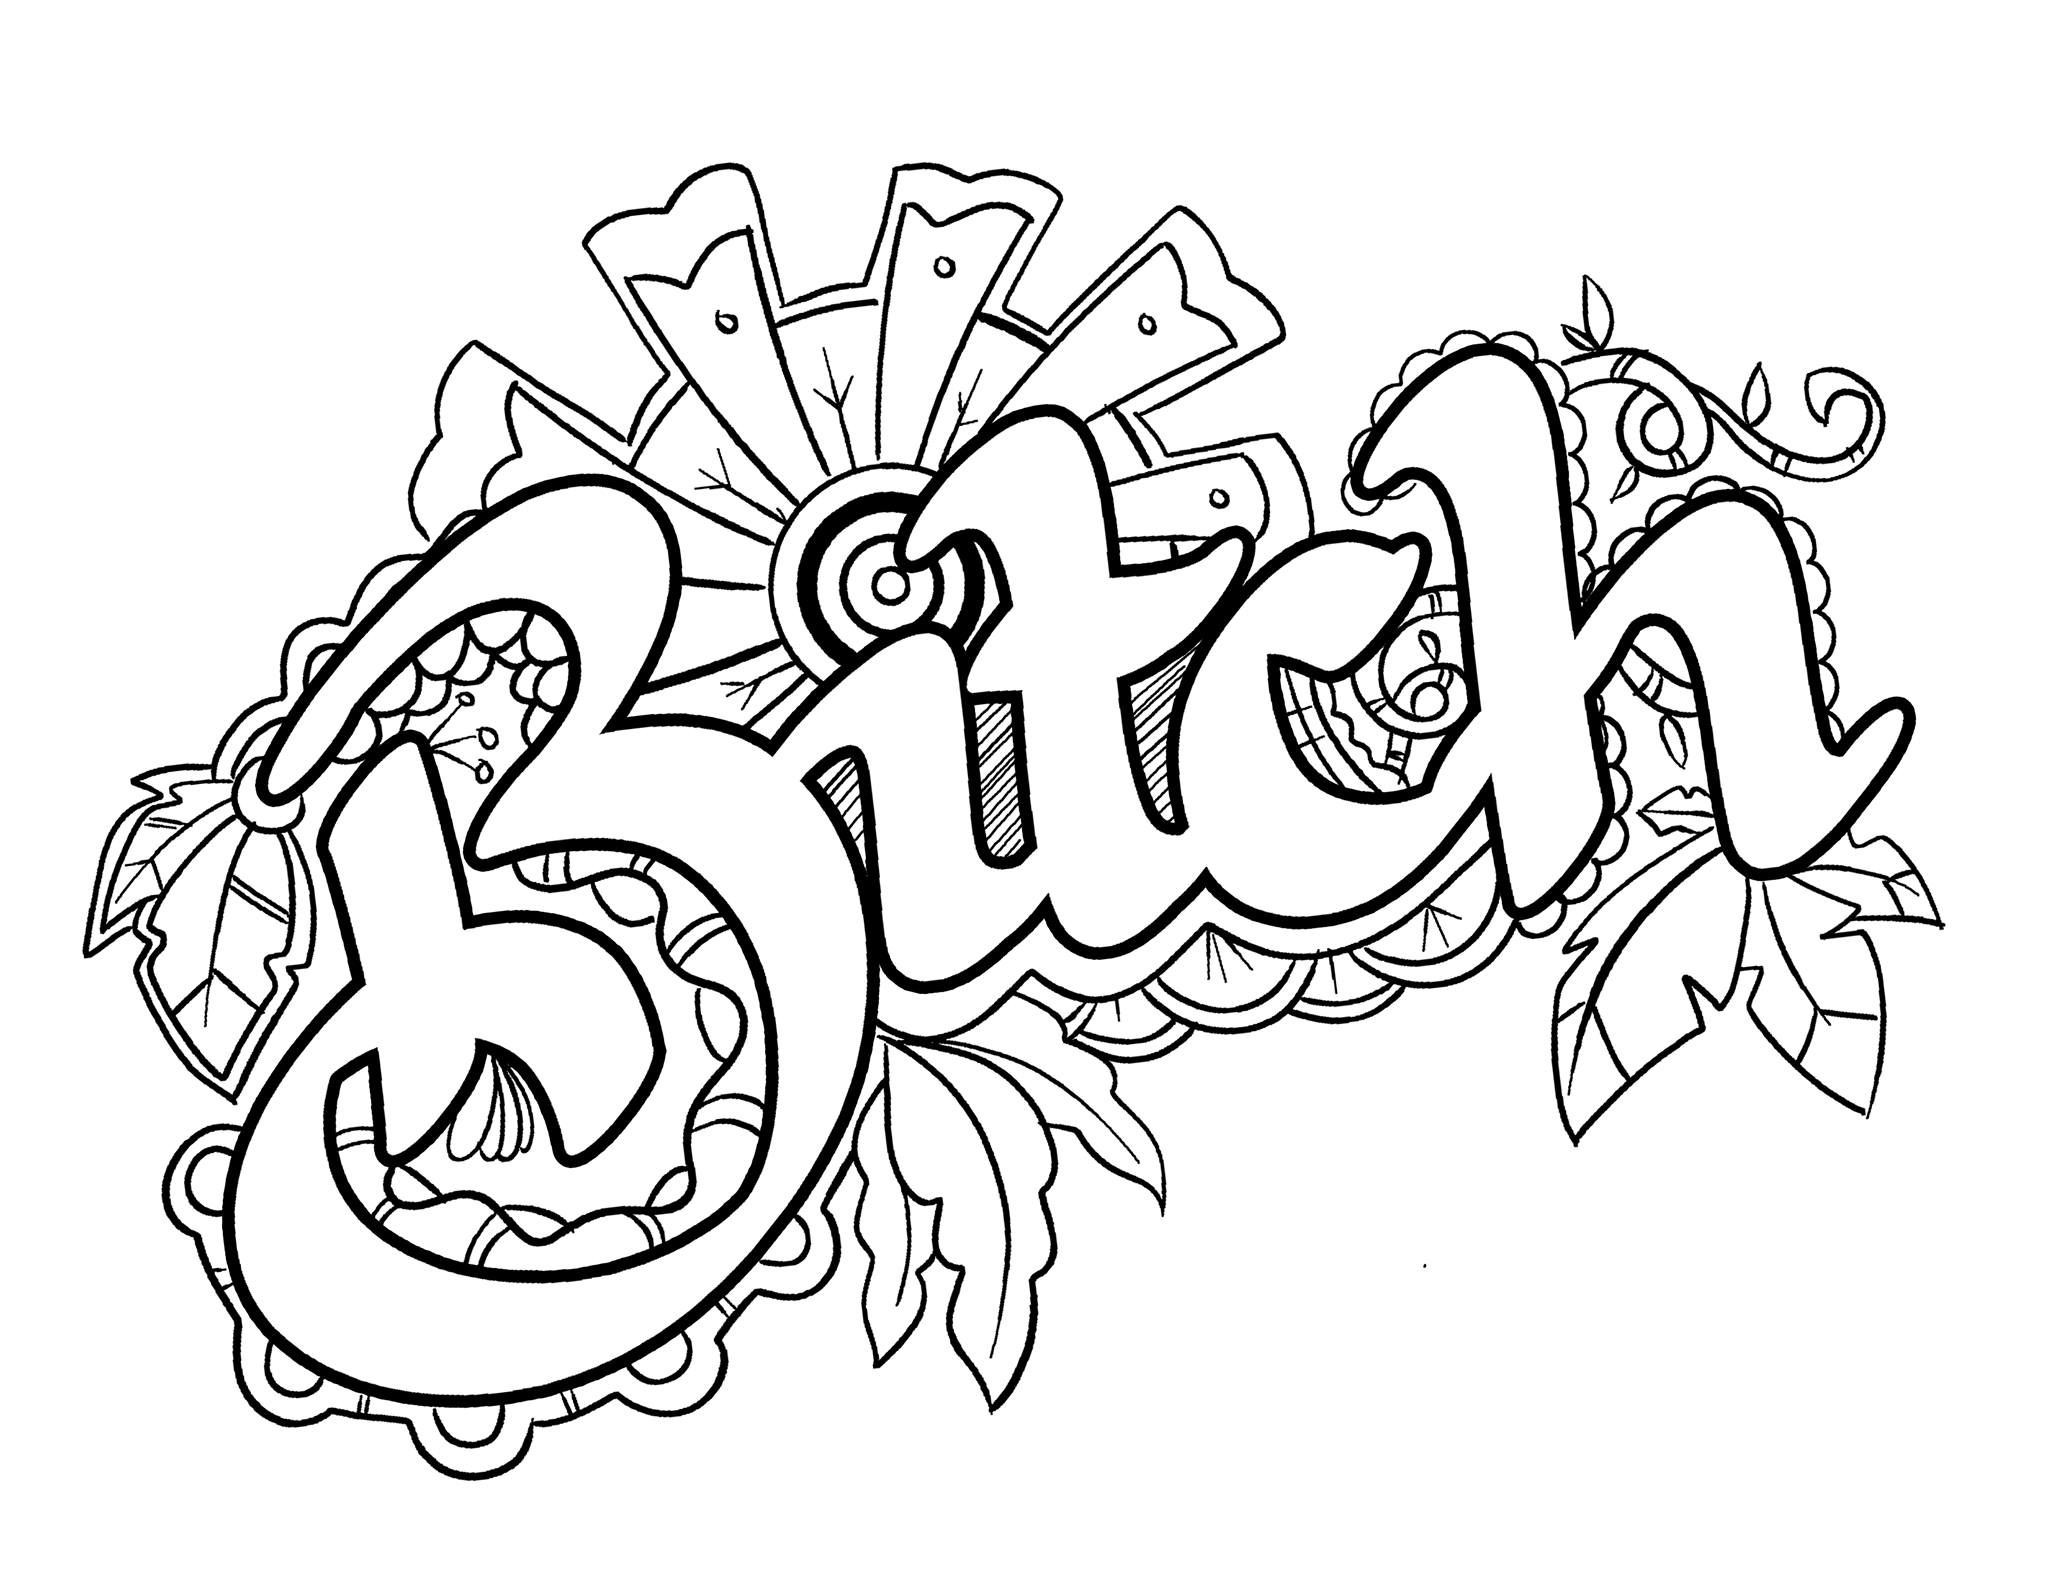 Swear Word Adult Coloring Pages
 Pin by tami jacobs on coloring hippie